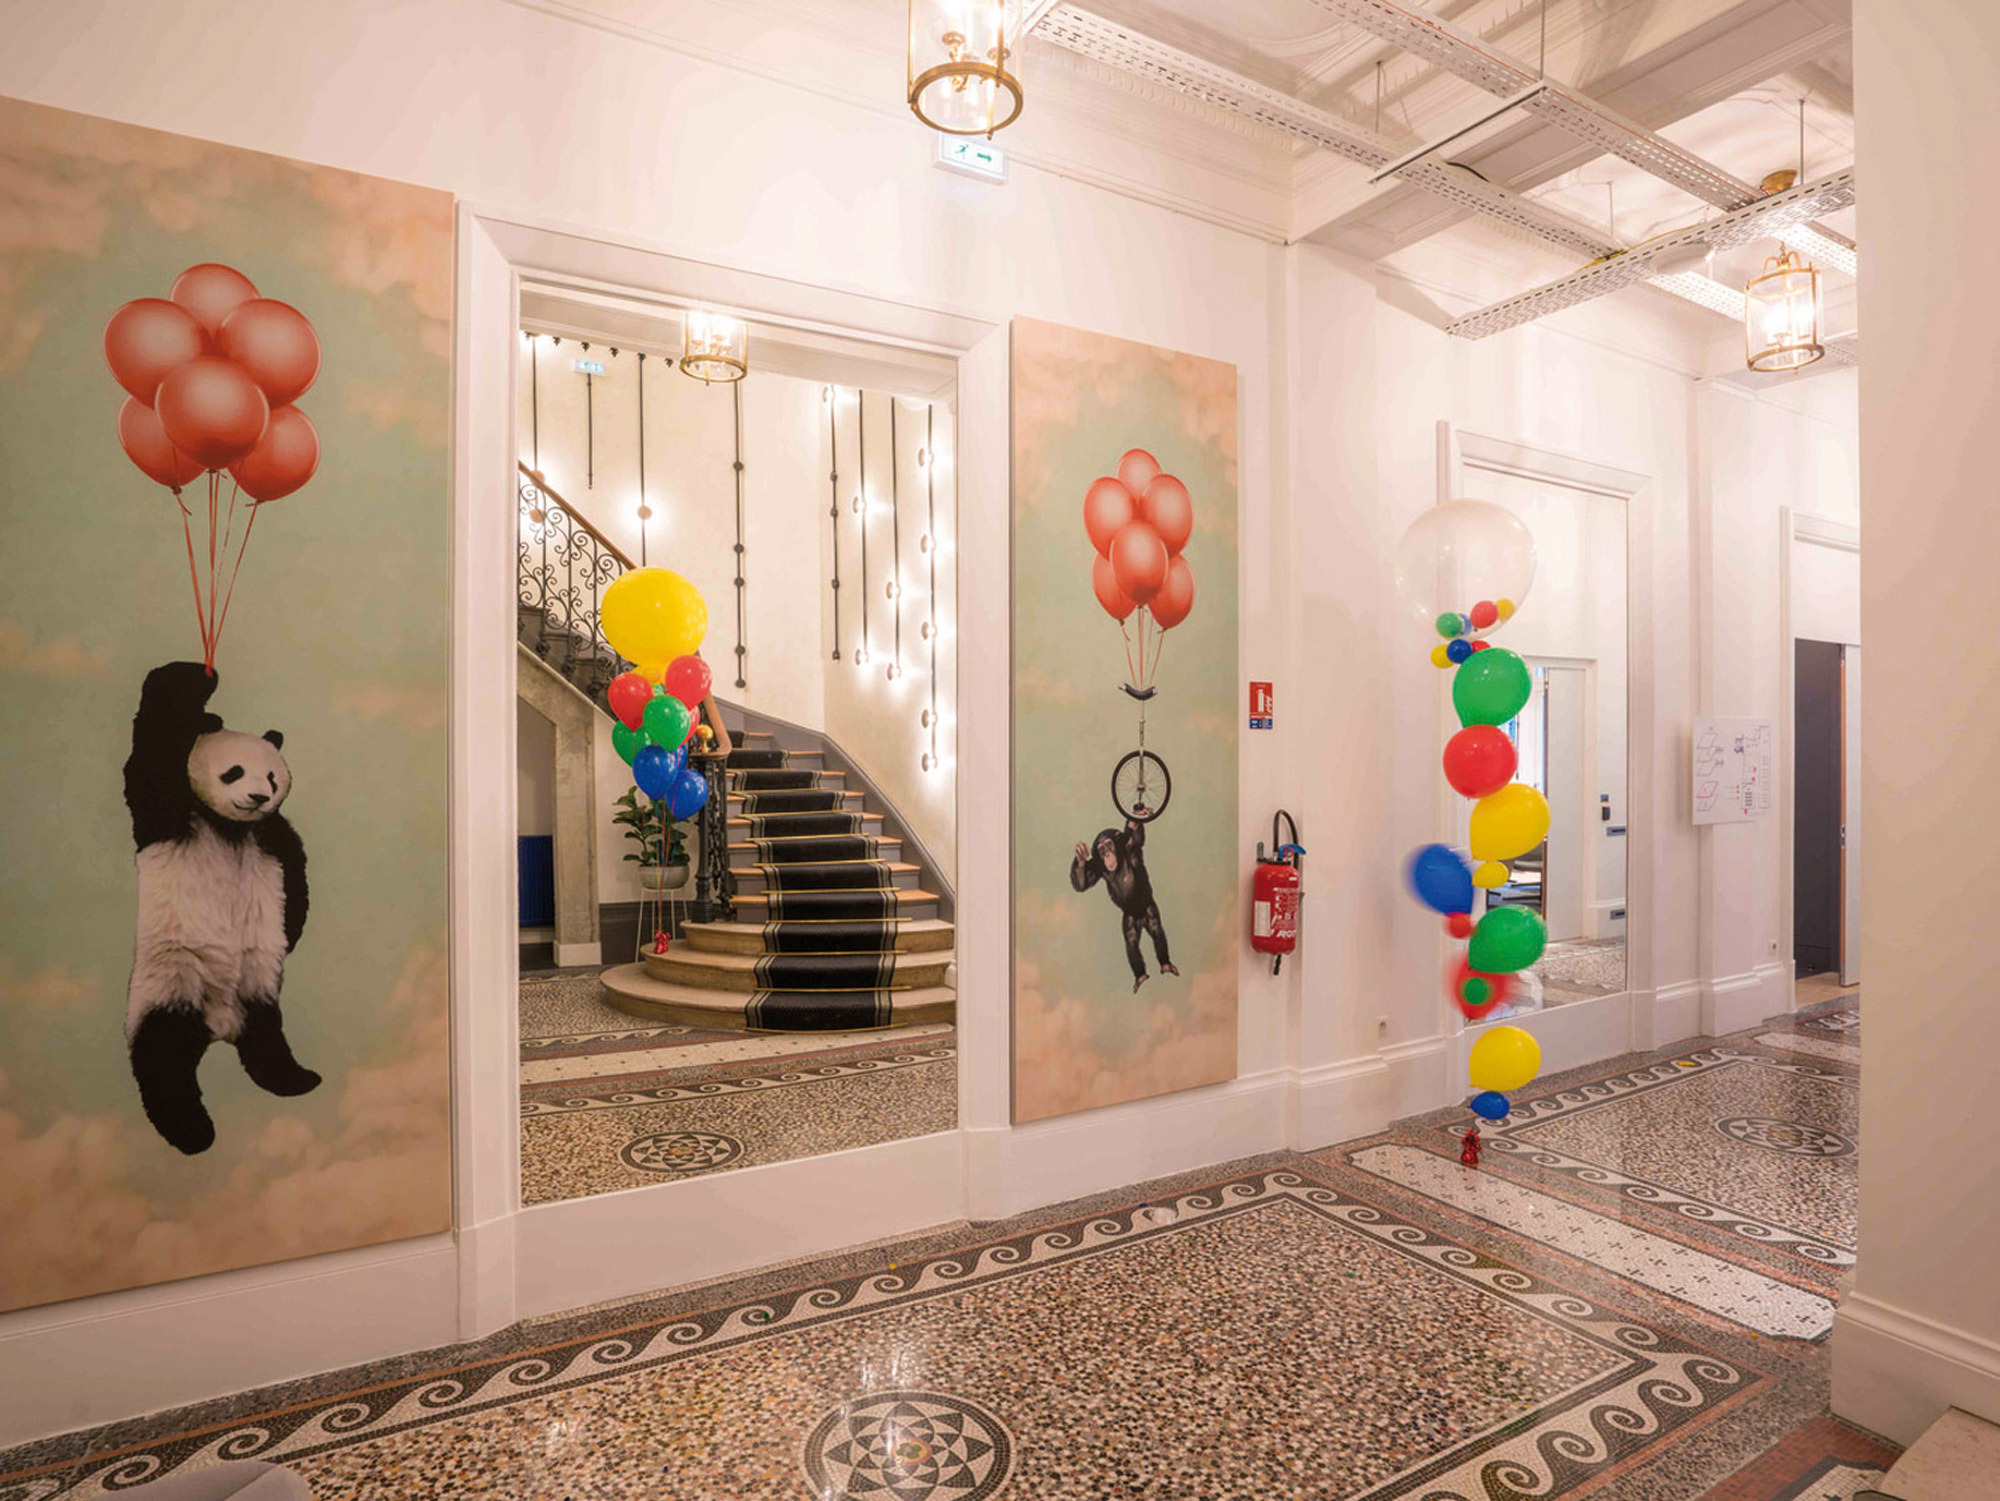 Elegant foyer featuring terrazzo flooring and a grand staircase, accentuated by whimsical artwork of pandas with balloons. Traditional moldings juxtapose modern playful elements, creating an eclectic aesthetic. Vibrant balloon clusters add a three-dimensional pop of color to the space.